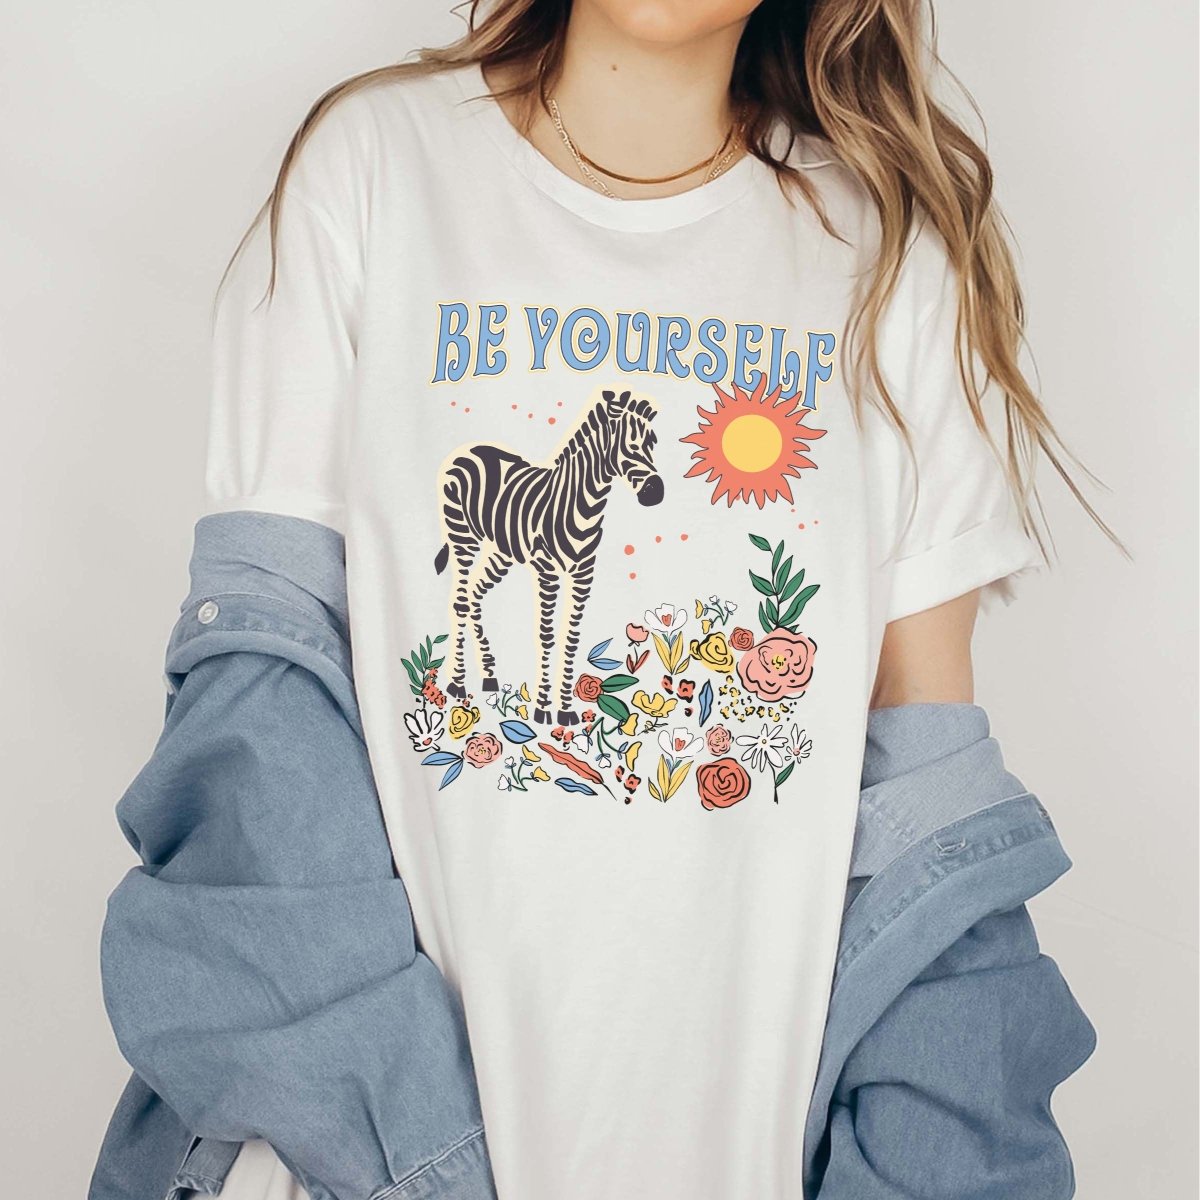 Be Yourself Tee - Limeberry Designs